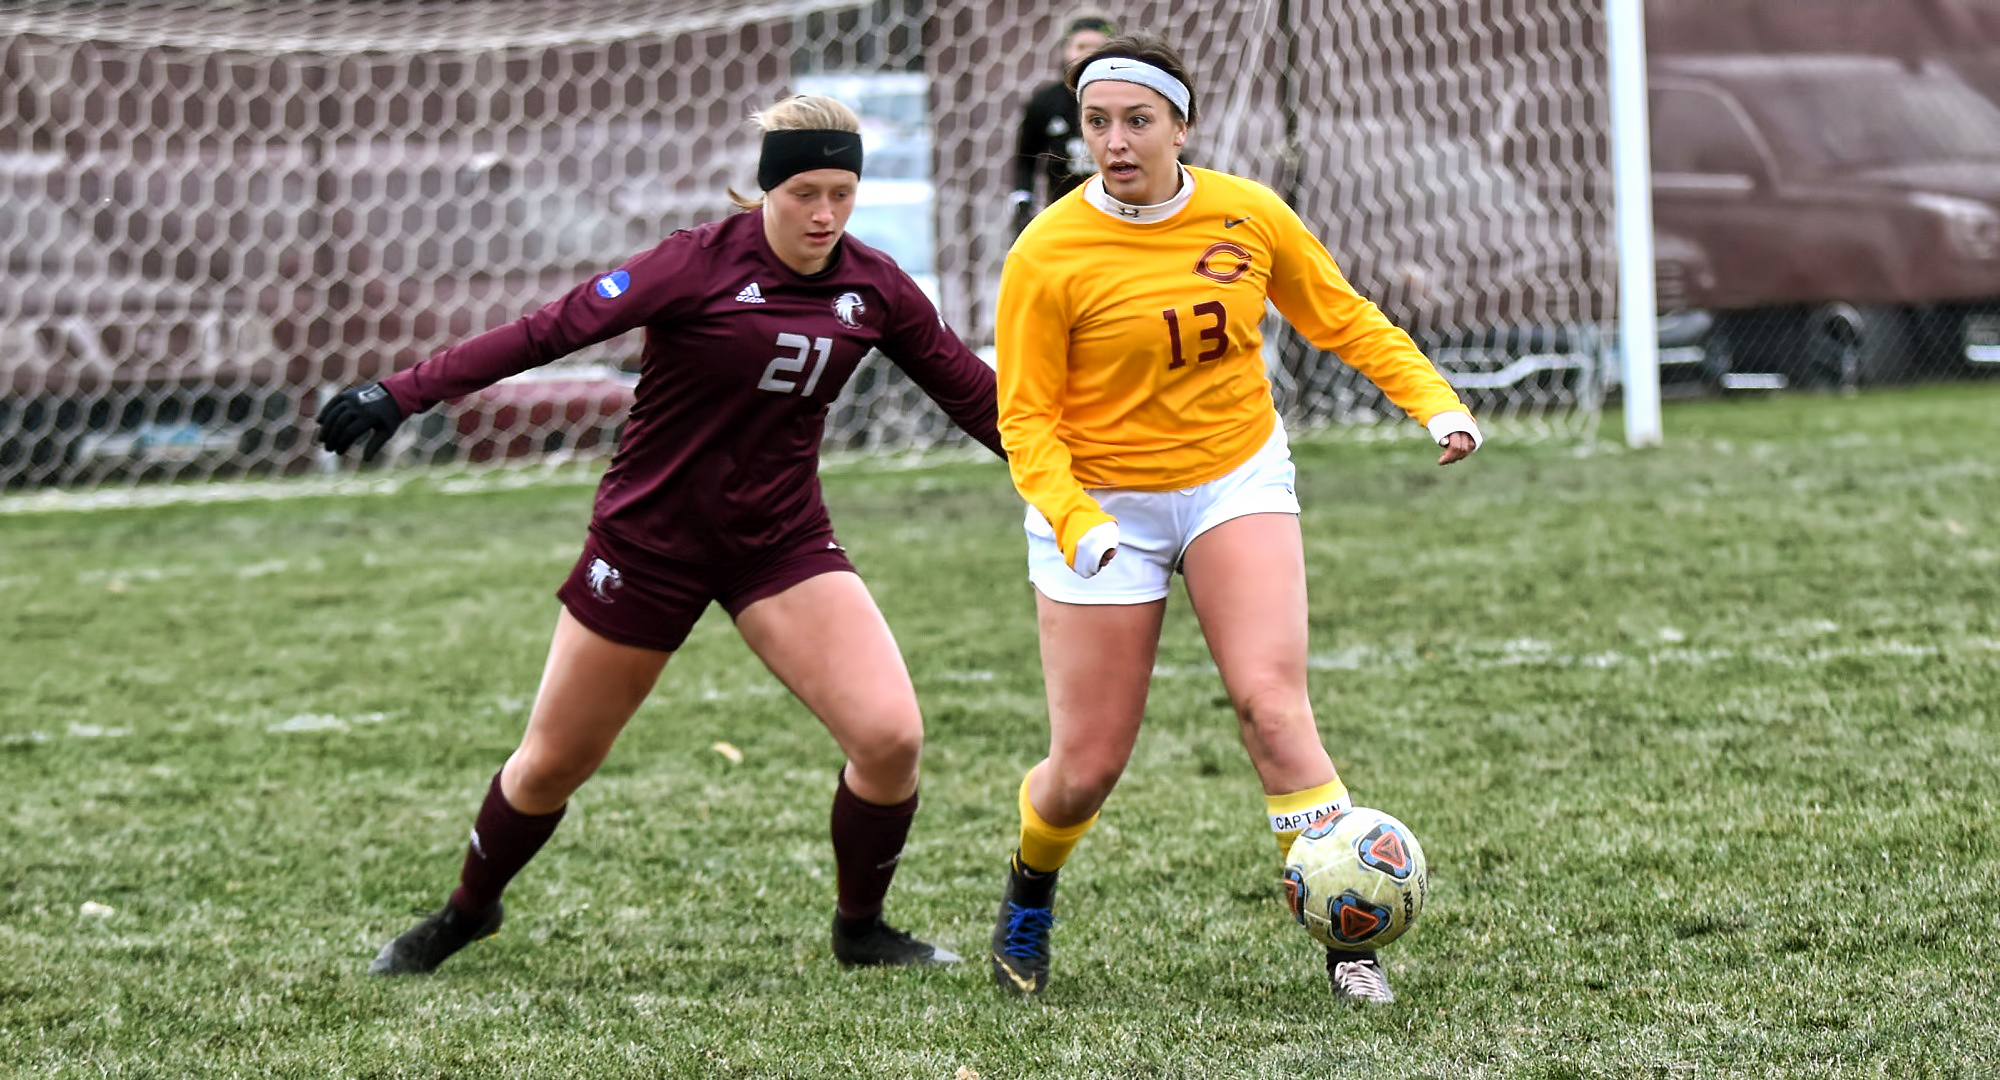 Senior Kalli Baarstad keeps the ball away from an Augsburg defender during the second half of the Cobbers' game with the Auggies. Baarstad led CC with four shots.